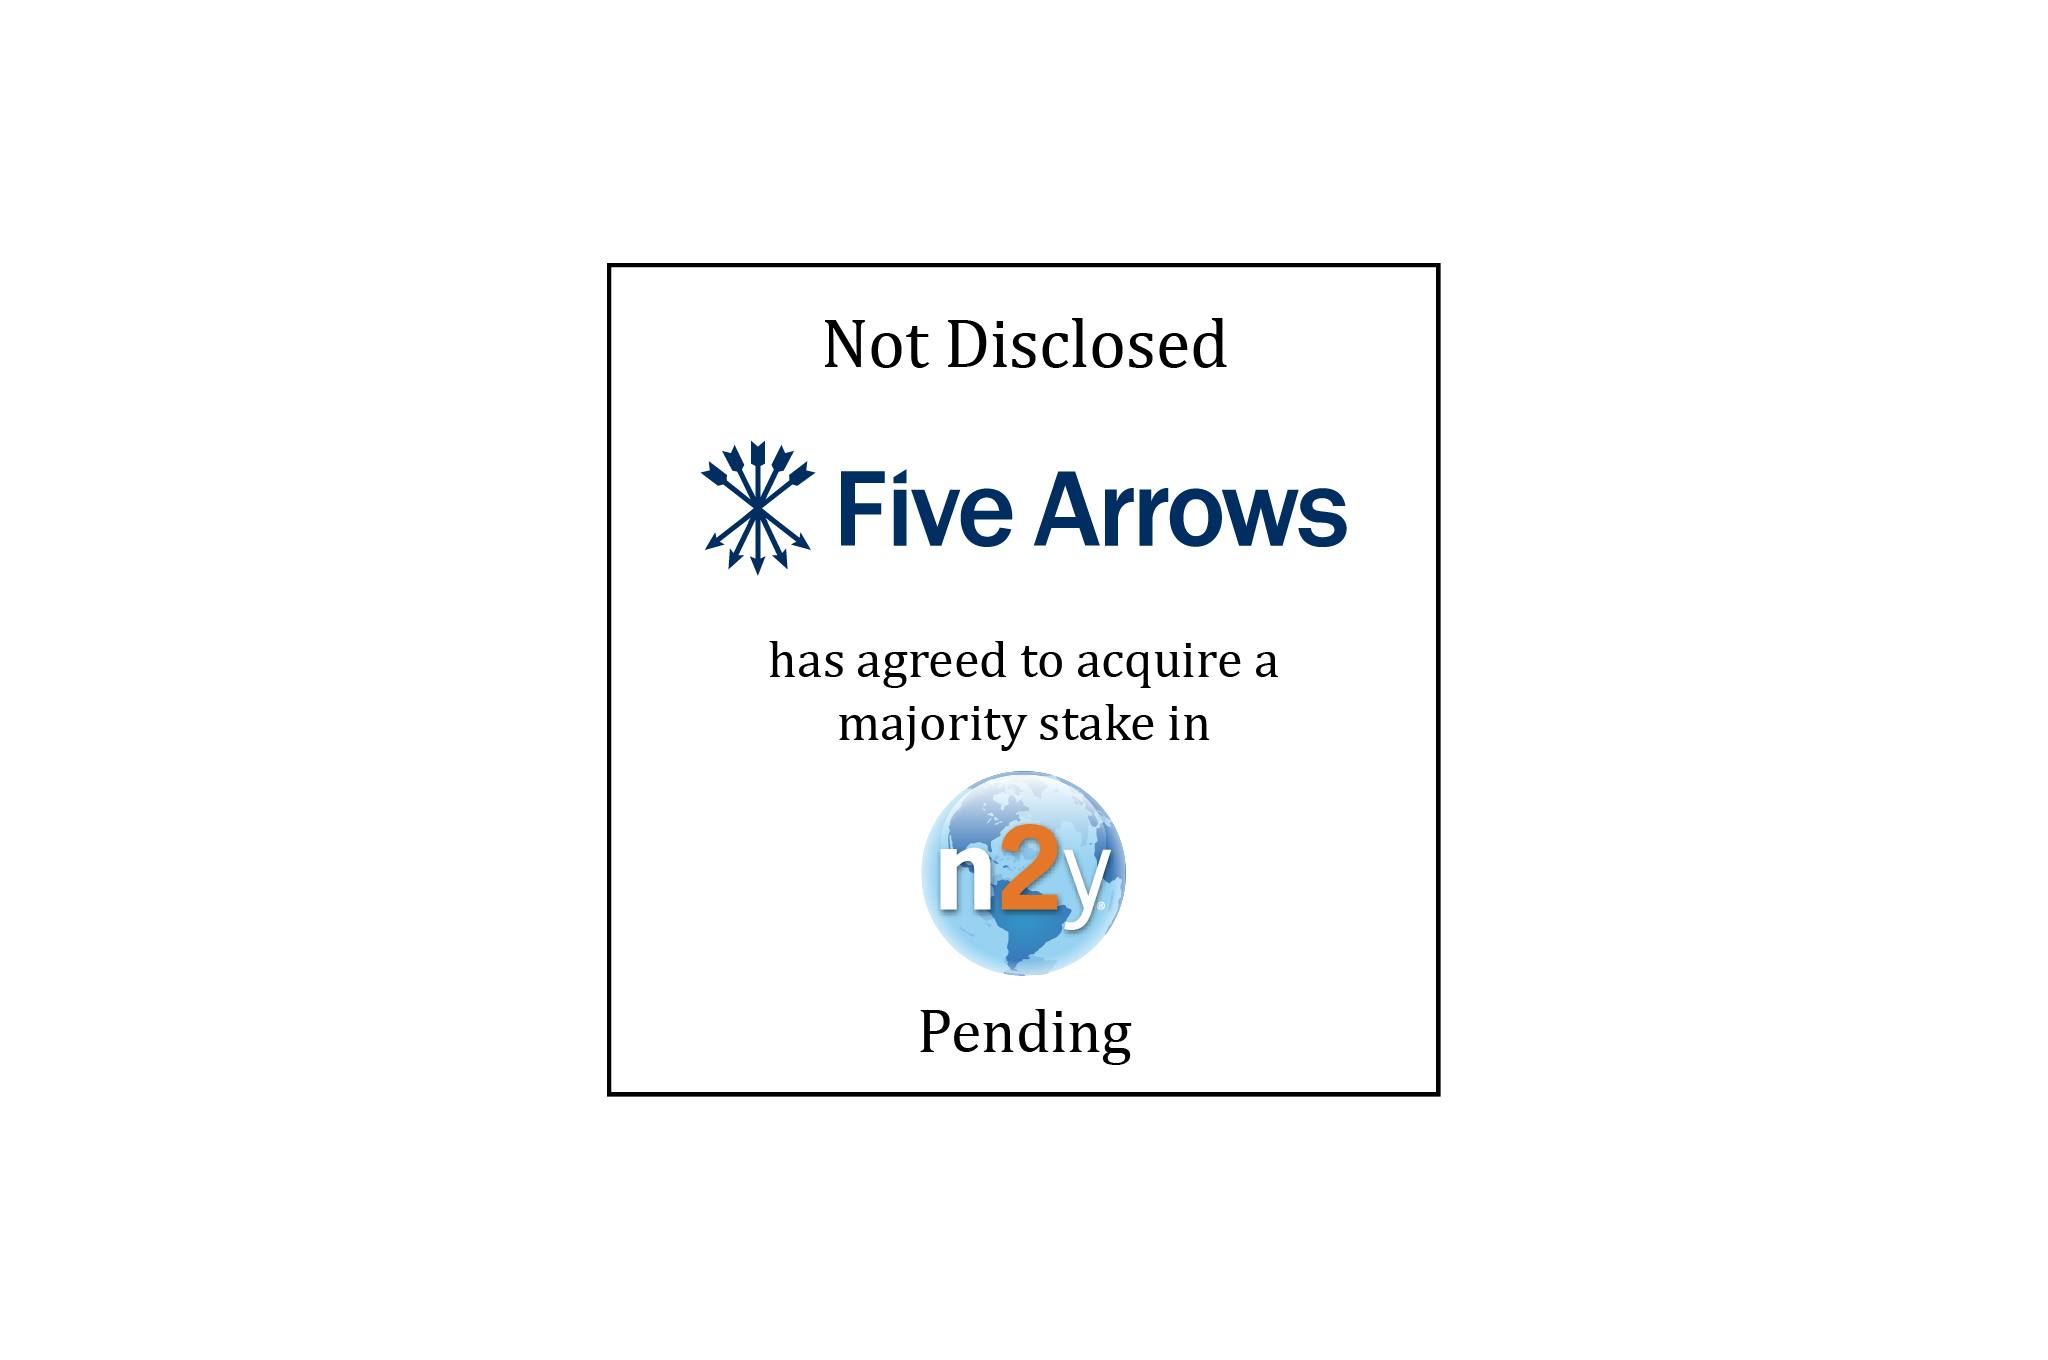 Not Disclosed | Five Arrows (logo) Has Agreed to Acquire a Majority Stake in n2y (logo) | Pending